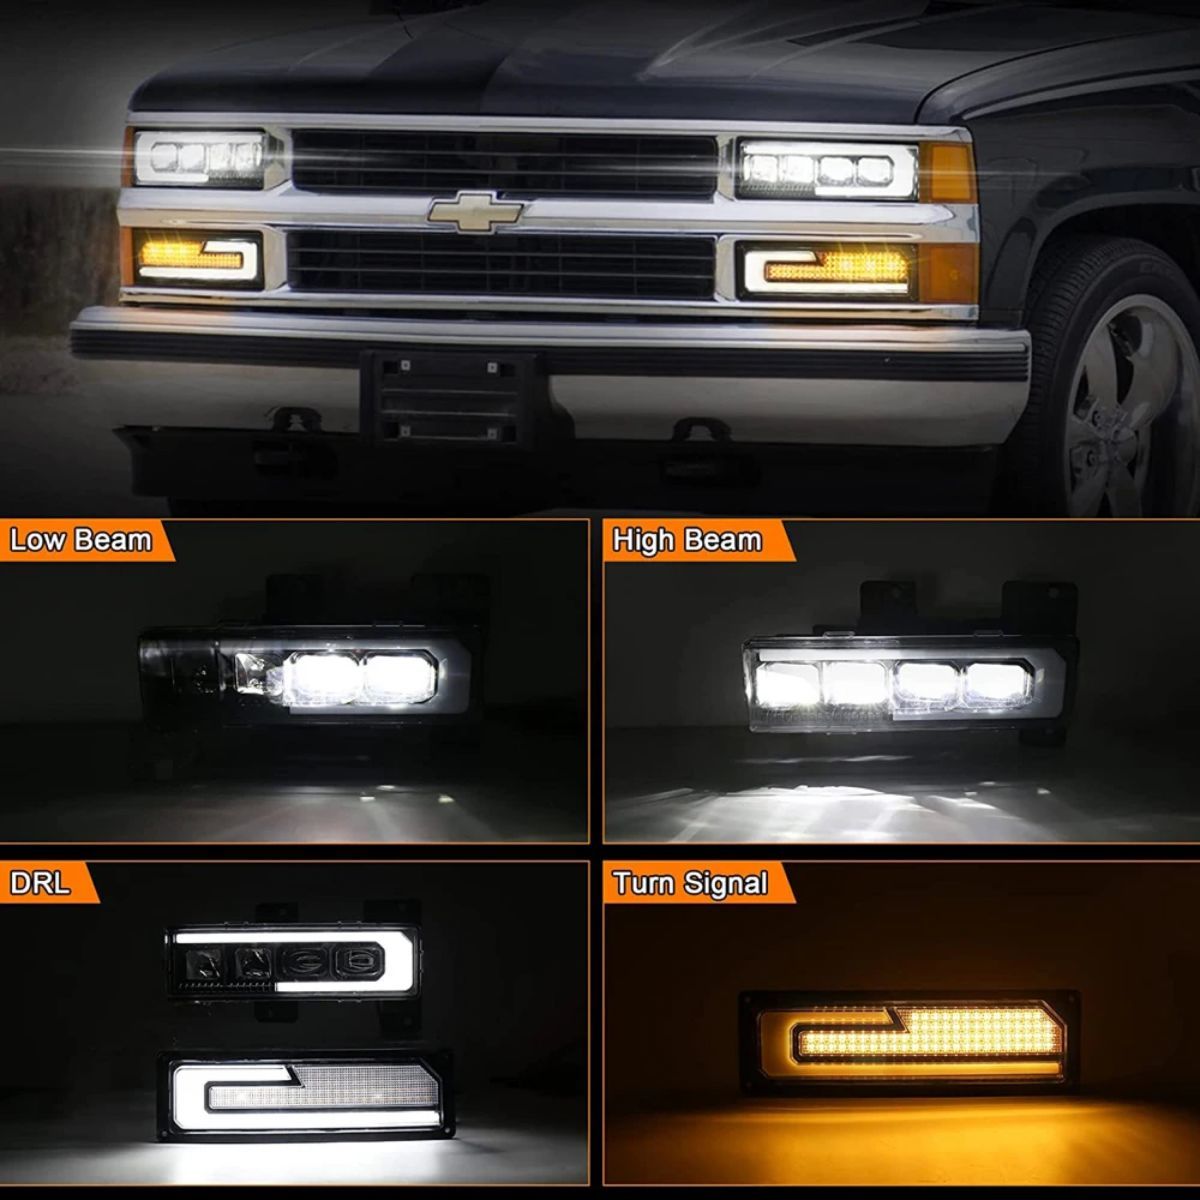  tax included LED fibre head light headlamp park signal Turn signal opening attaching 88-98y C1500 K1500 truck immediate payment stock goods 